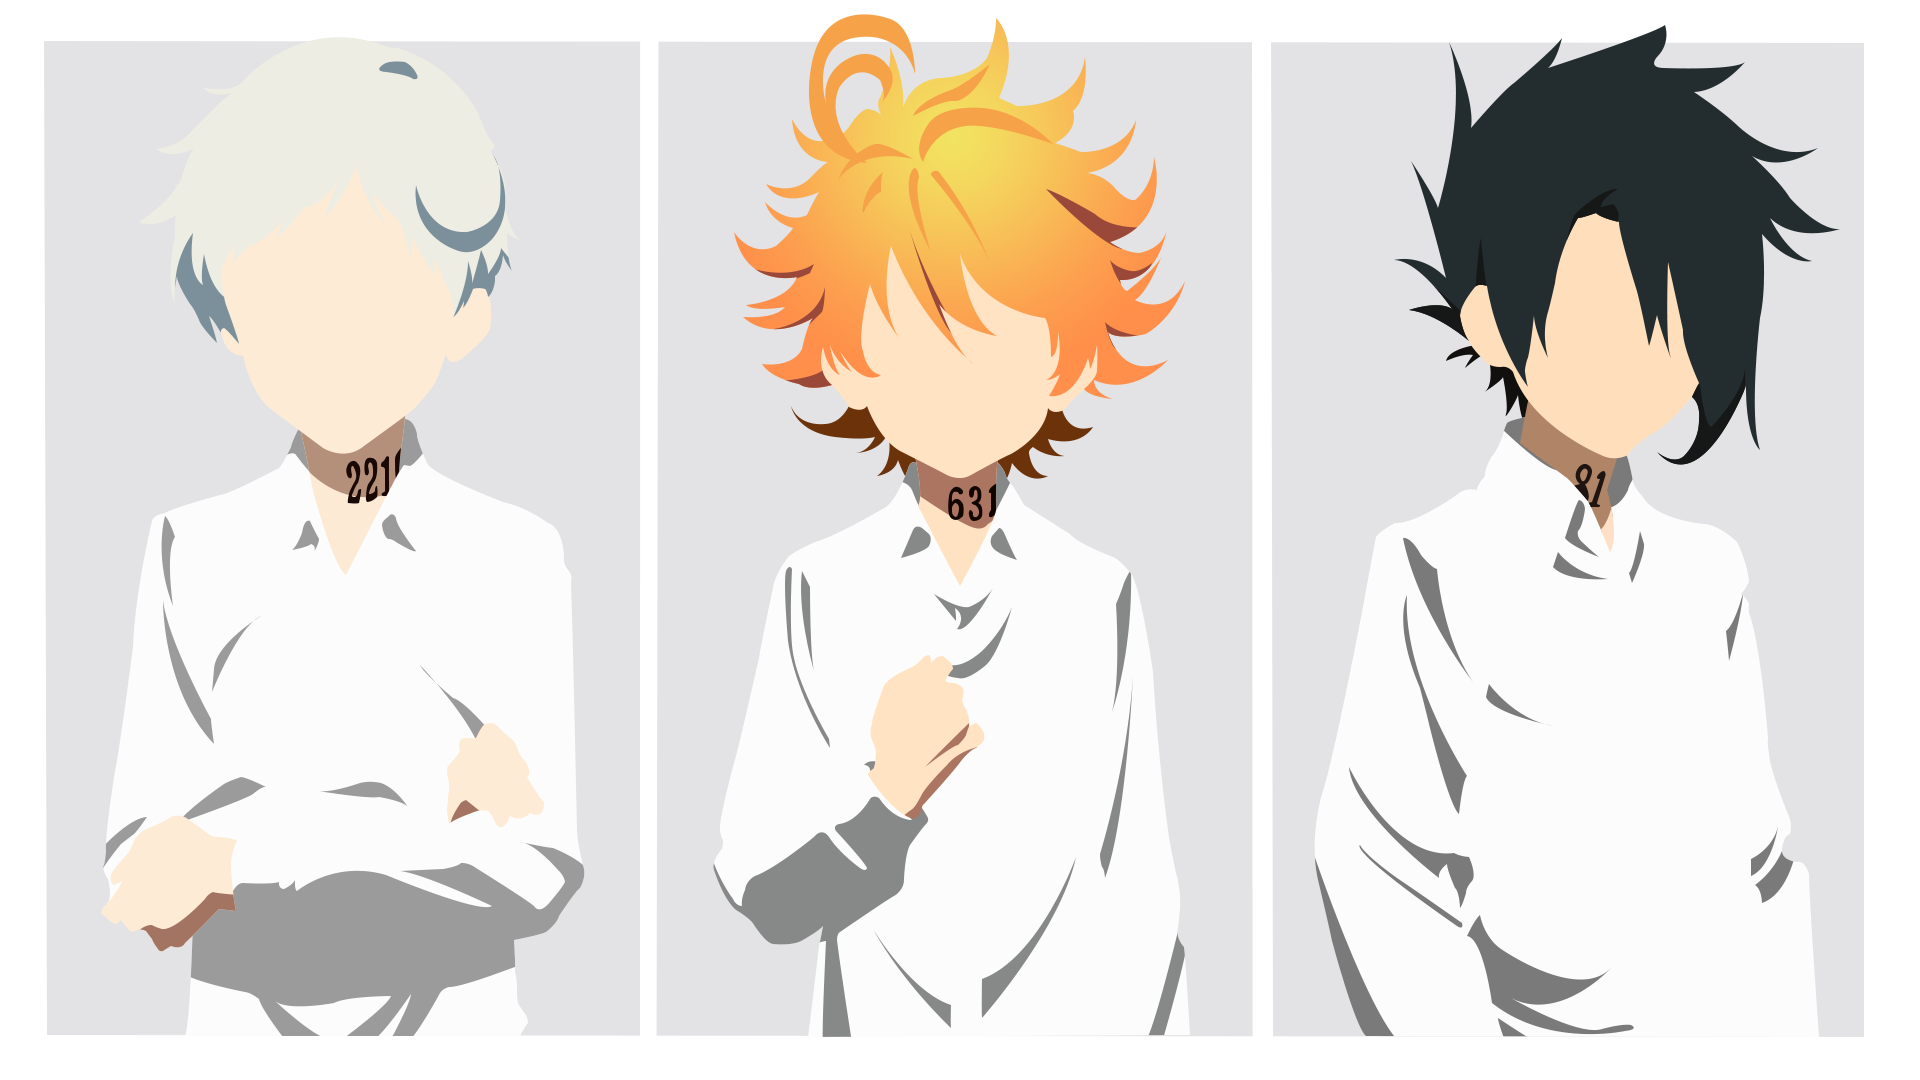 Emma, Ray and Norman from The Promised Neverland Wallpaper for Dekstop by Zunnn